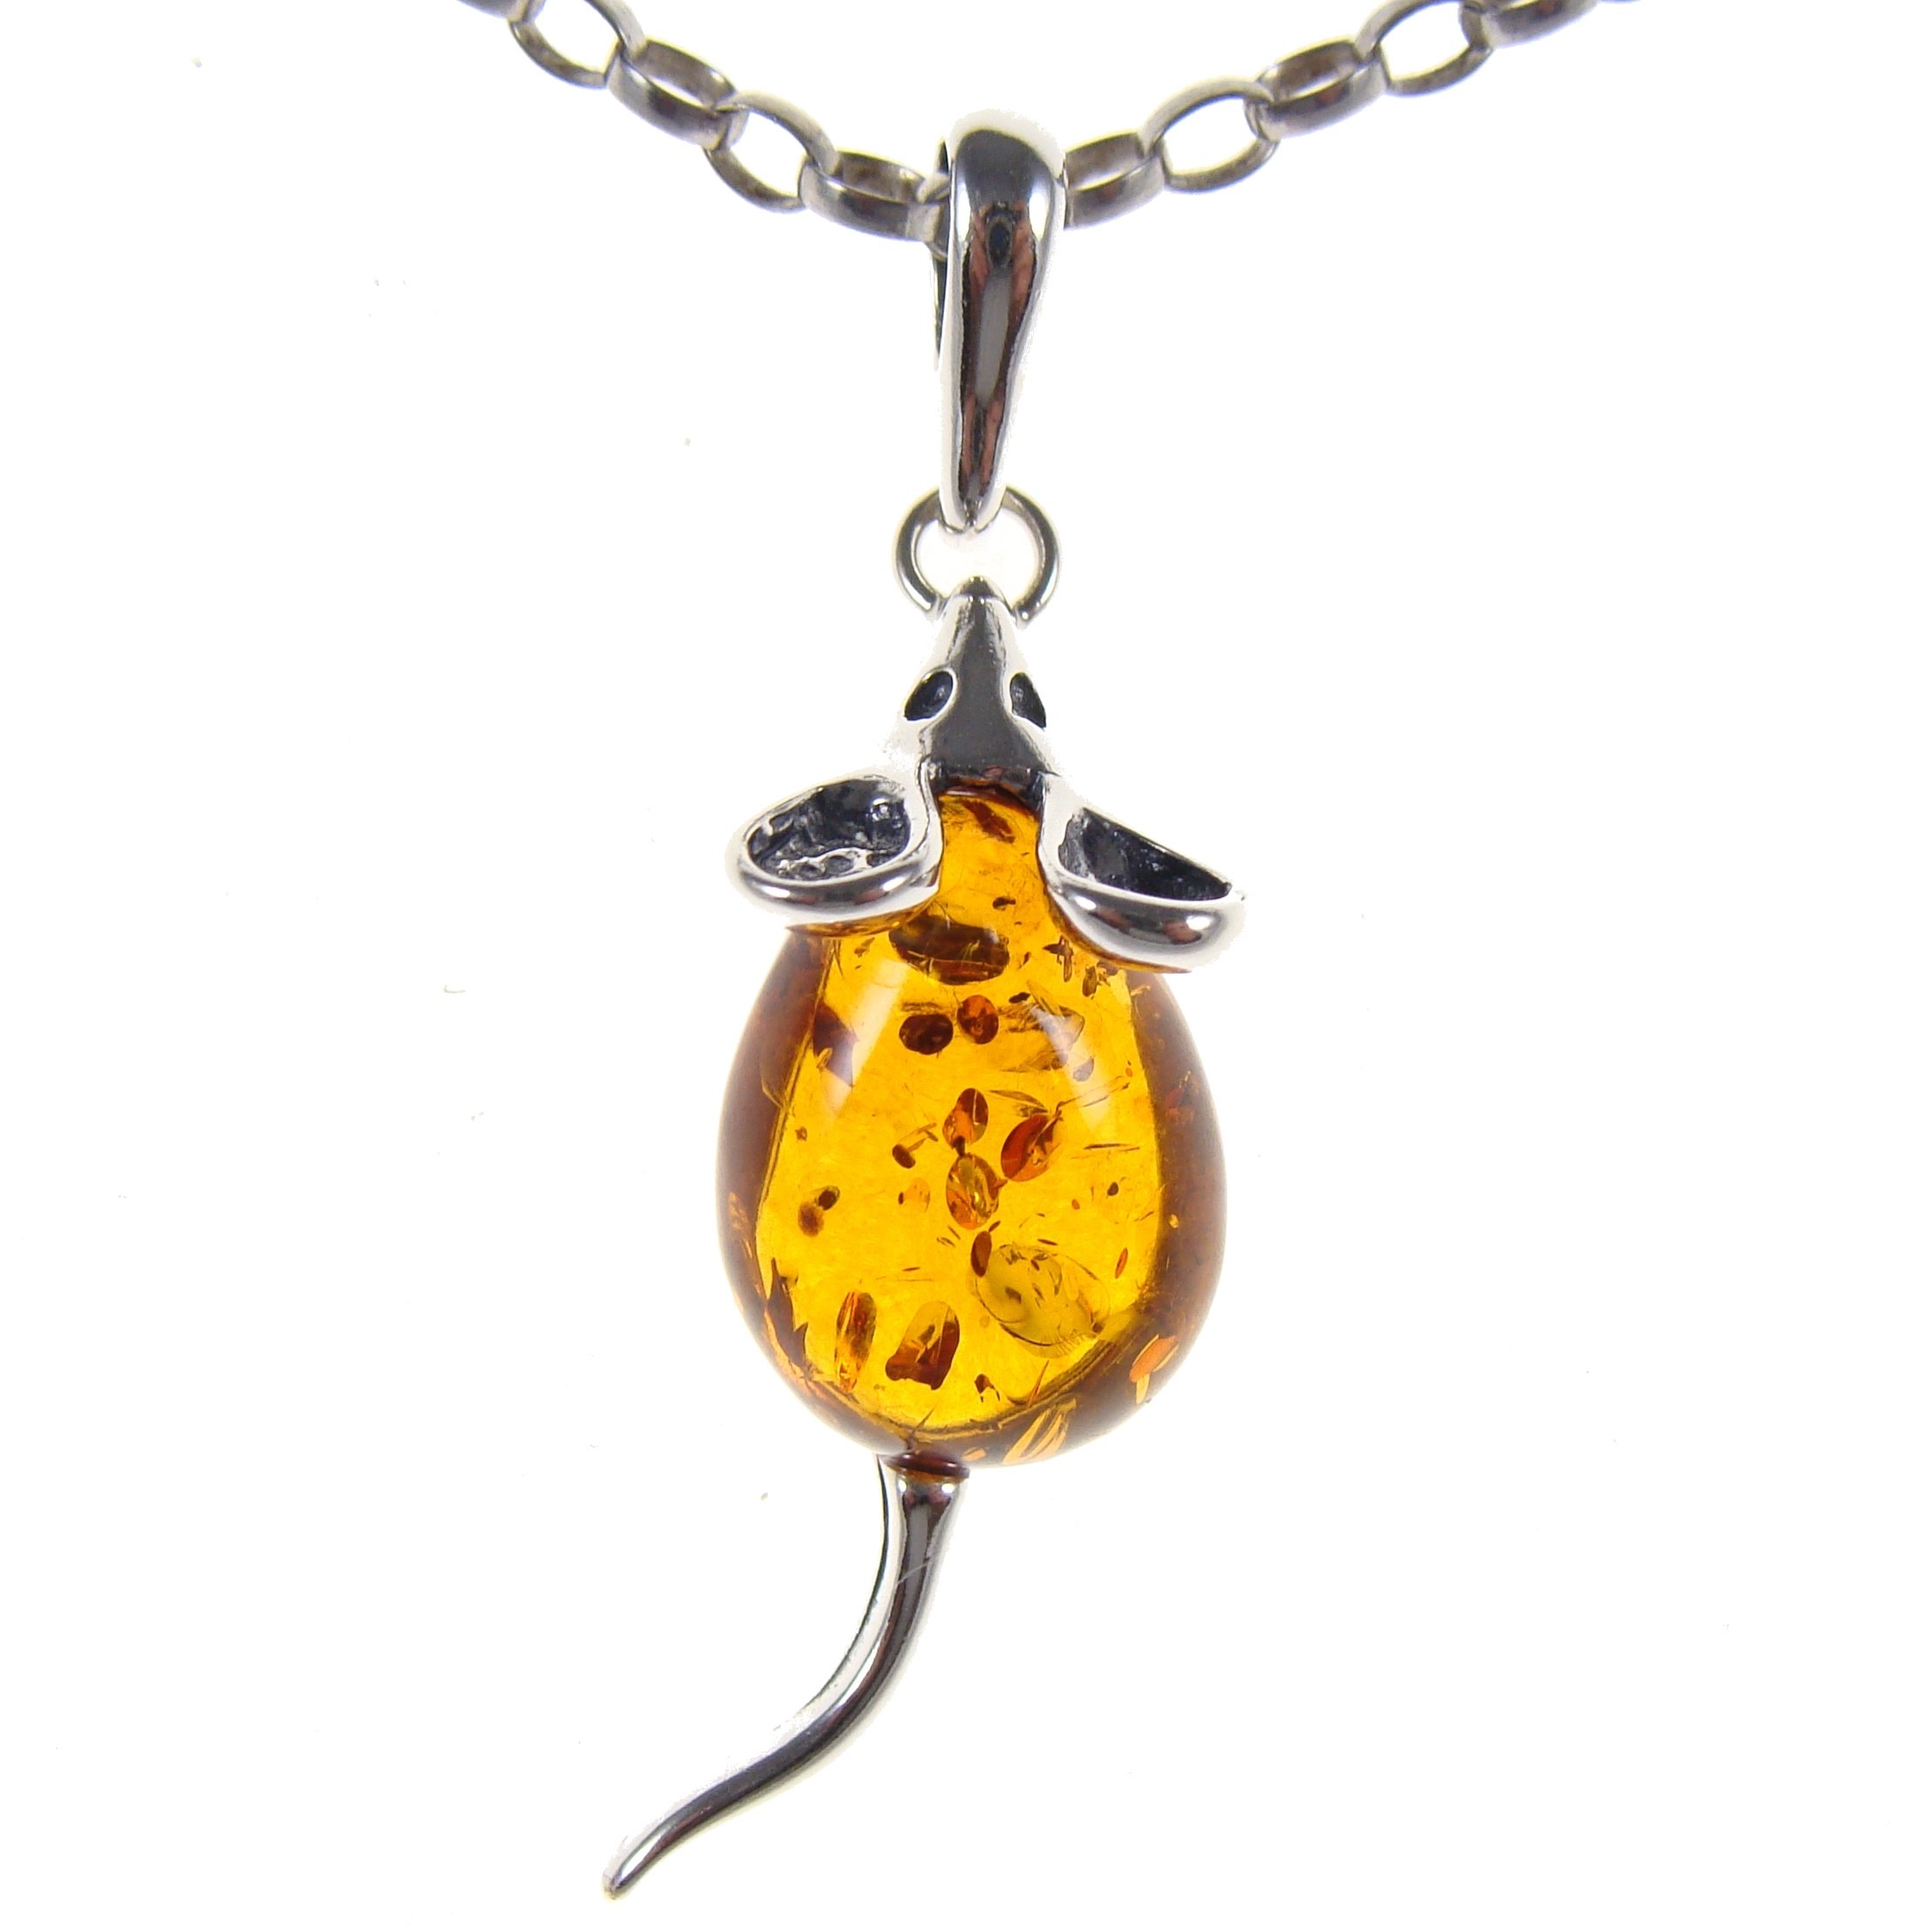 BALTIC AMBER AND STERLING SILVER 925 MOUSE PENDANT NECKLACE - 14 16 18 20 22 24 26 28 30 32 34